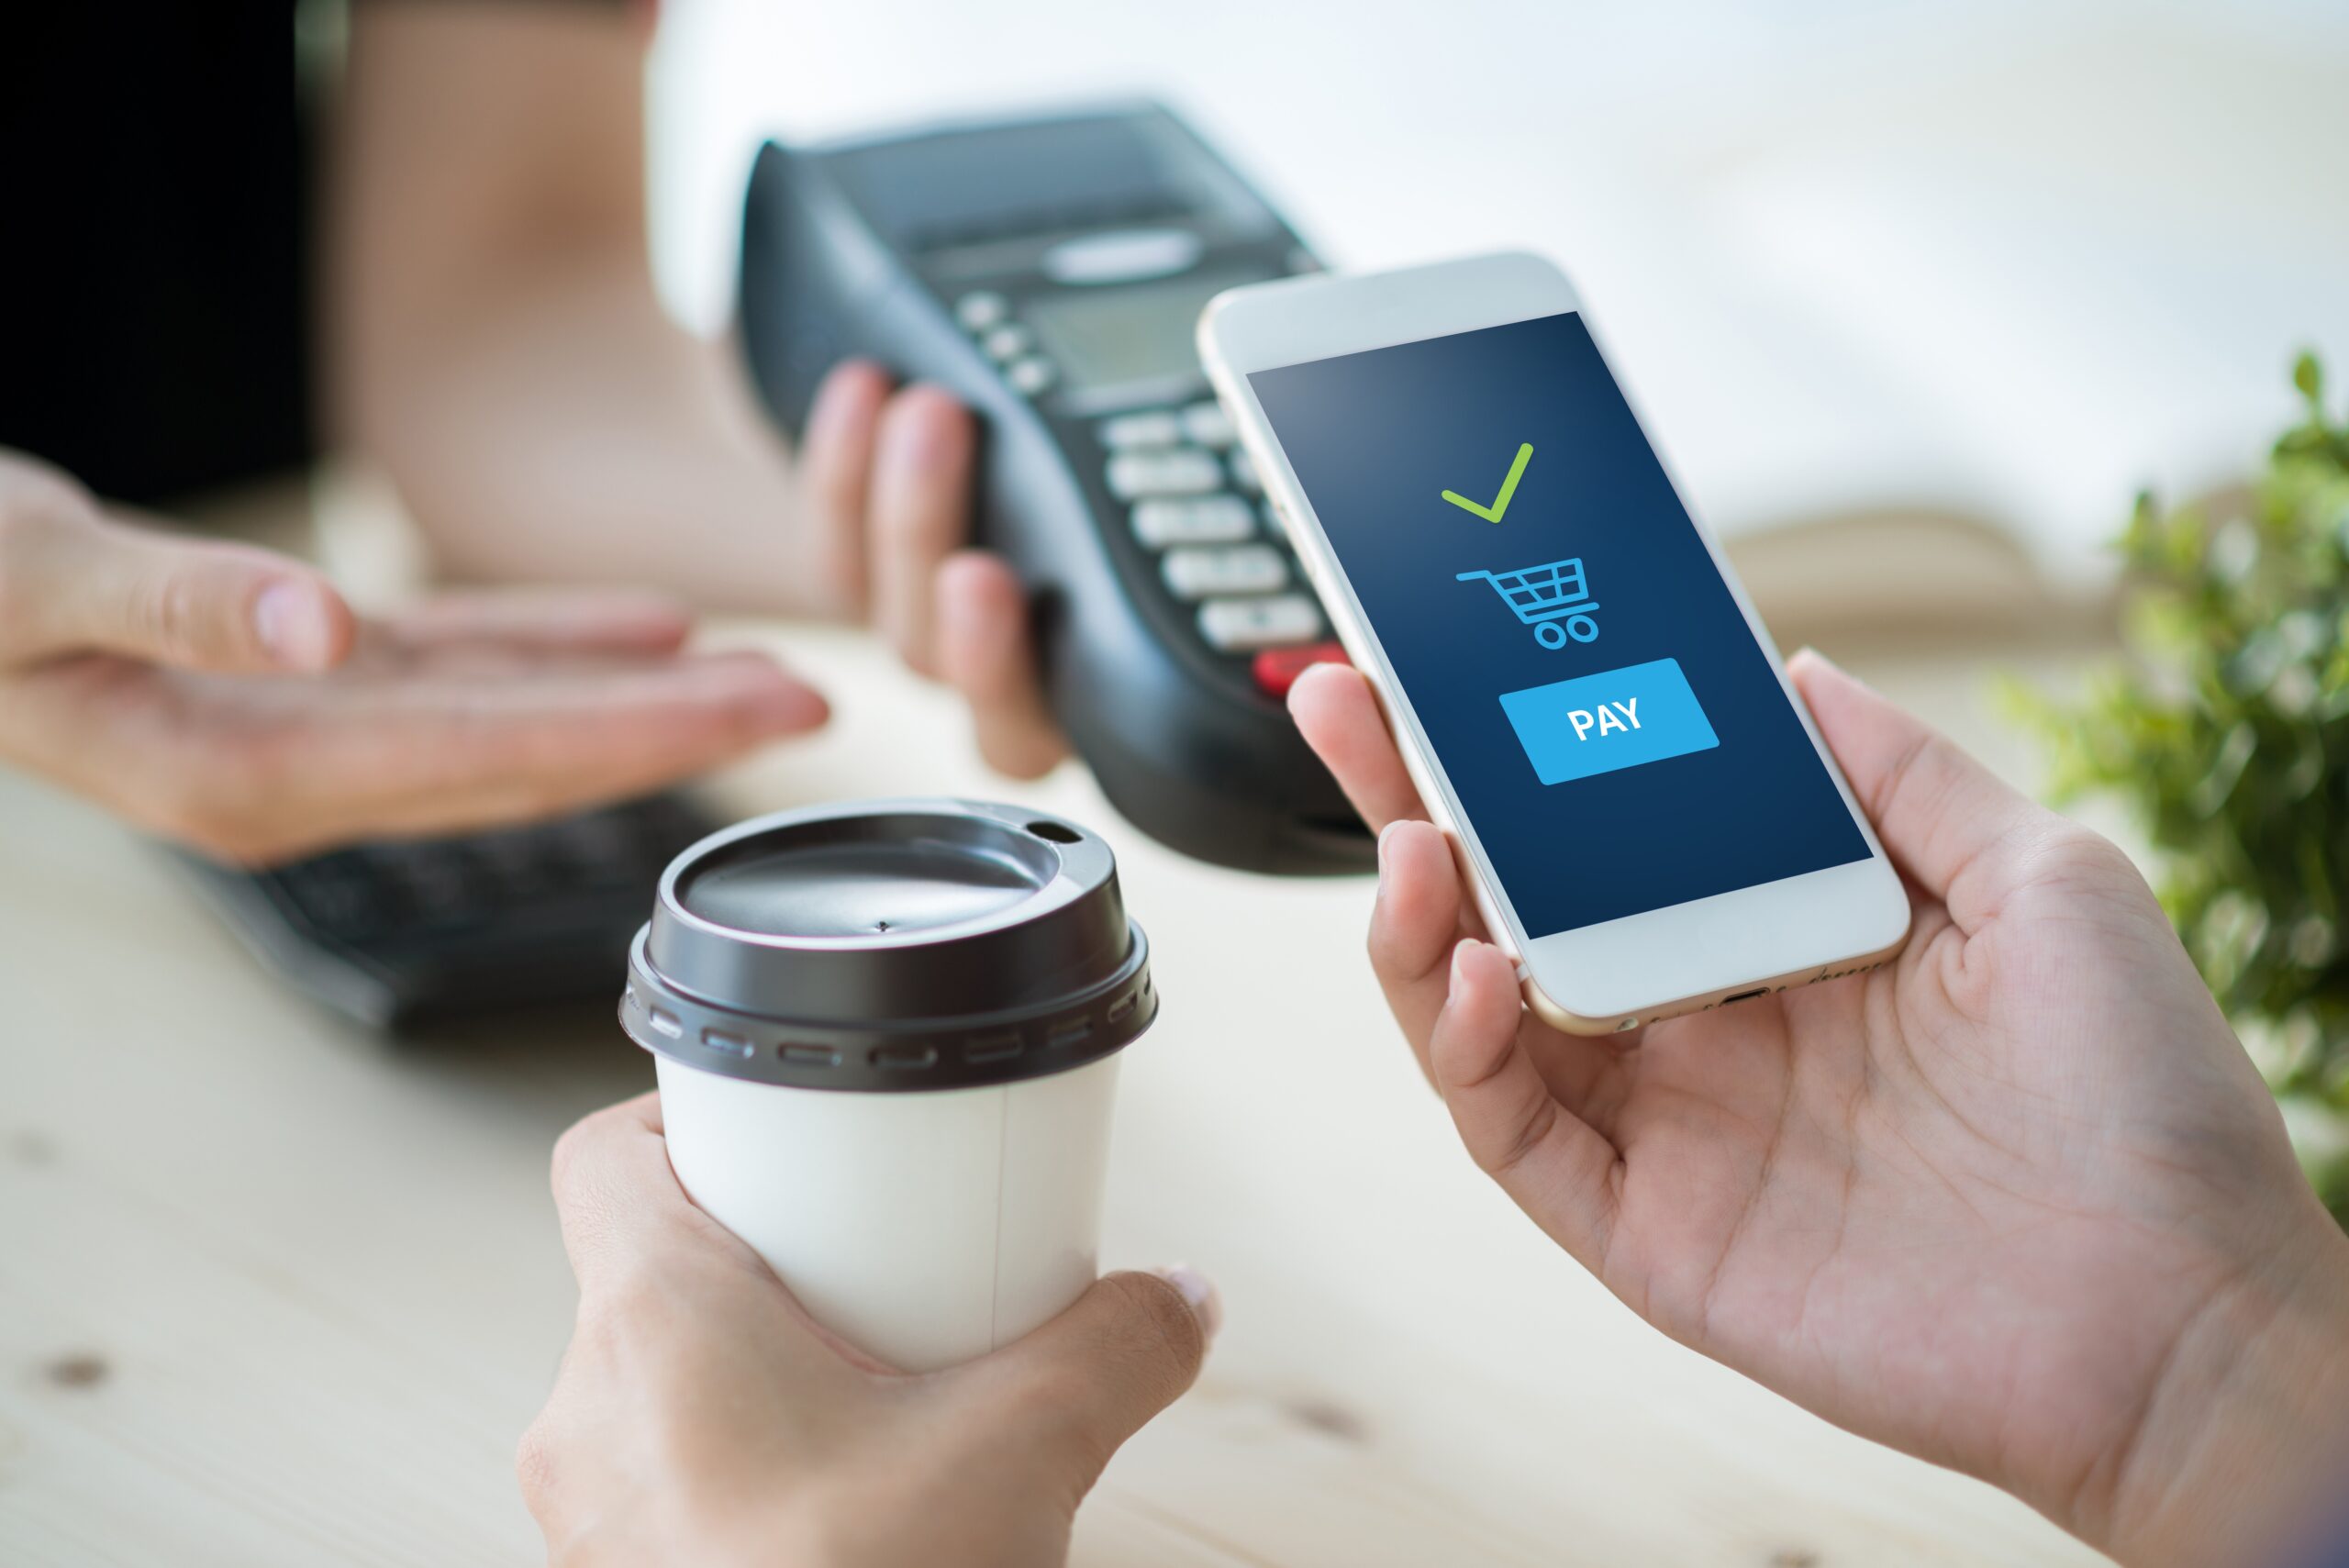 Future of mobile payments